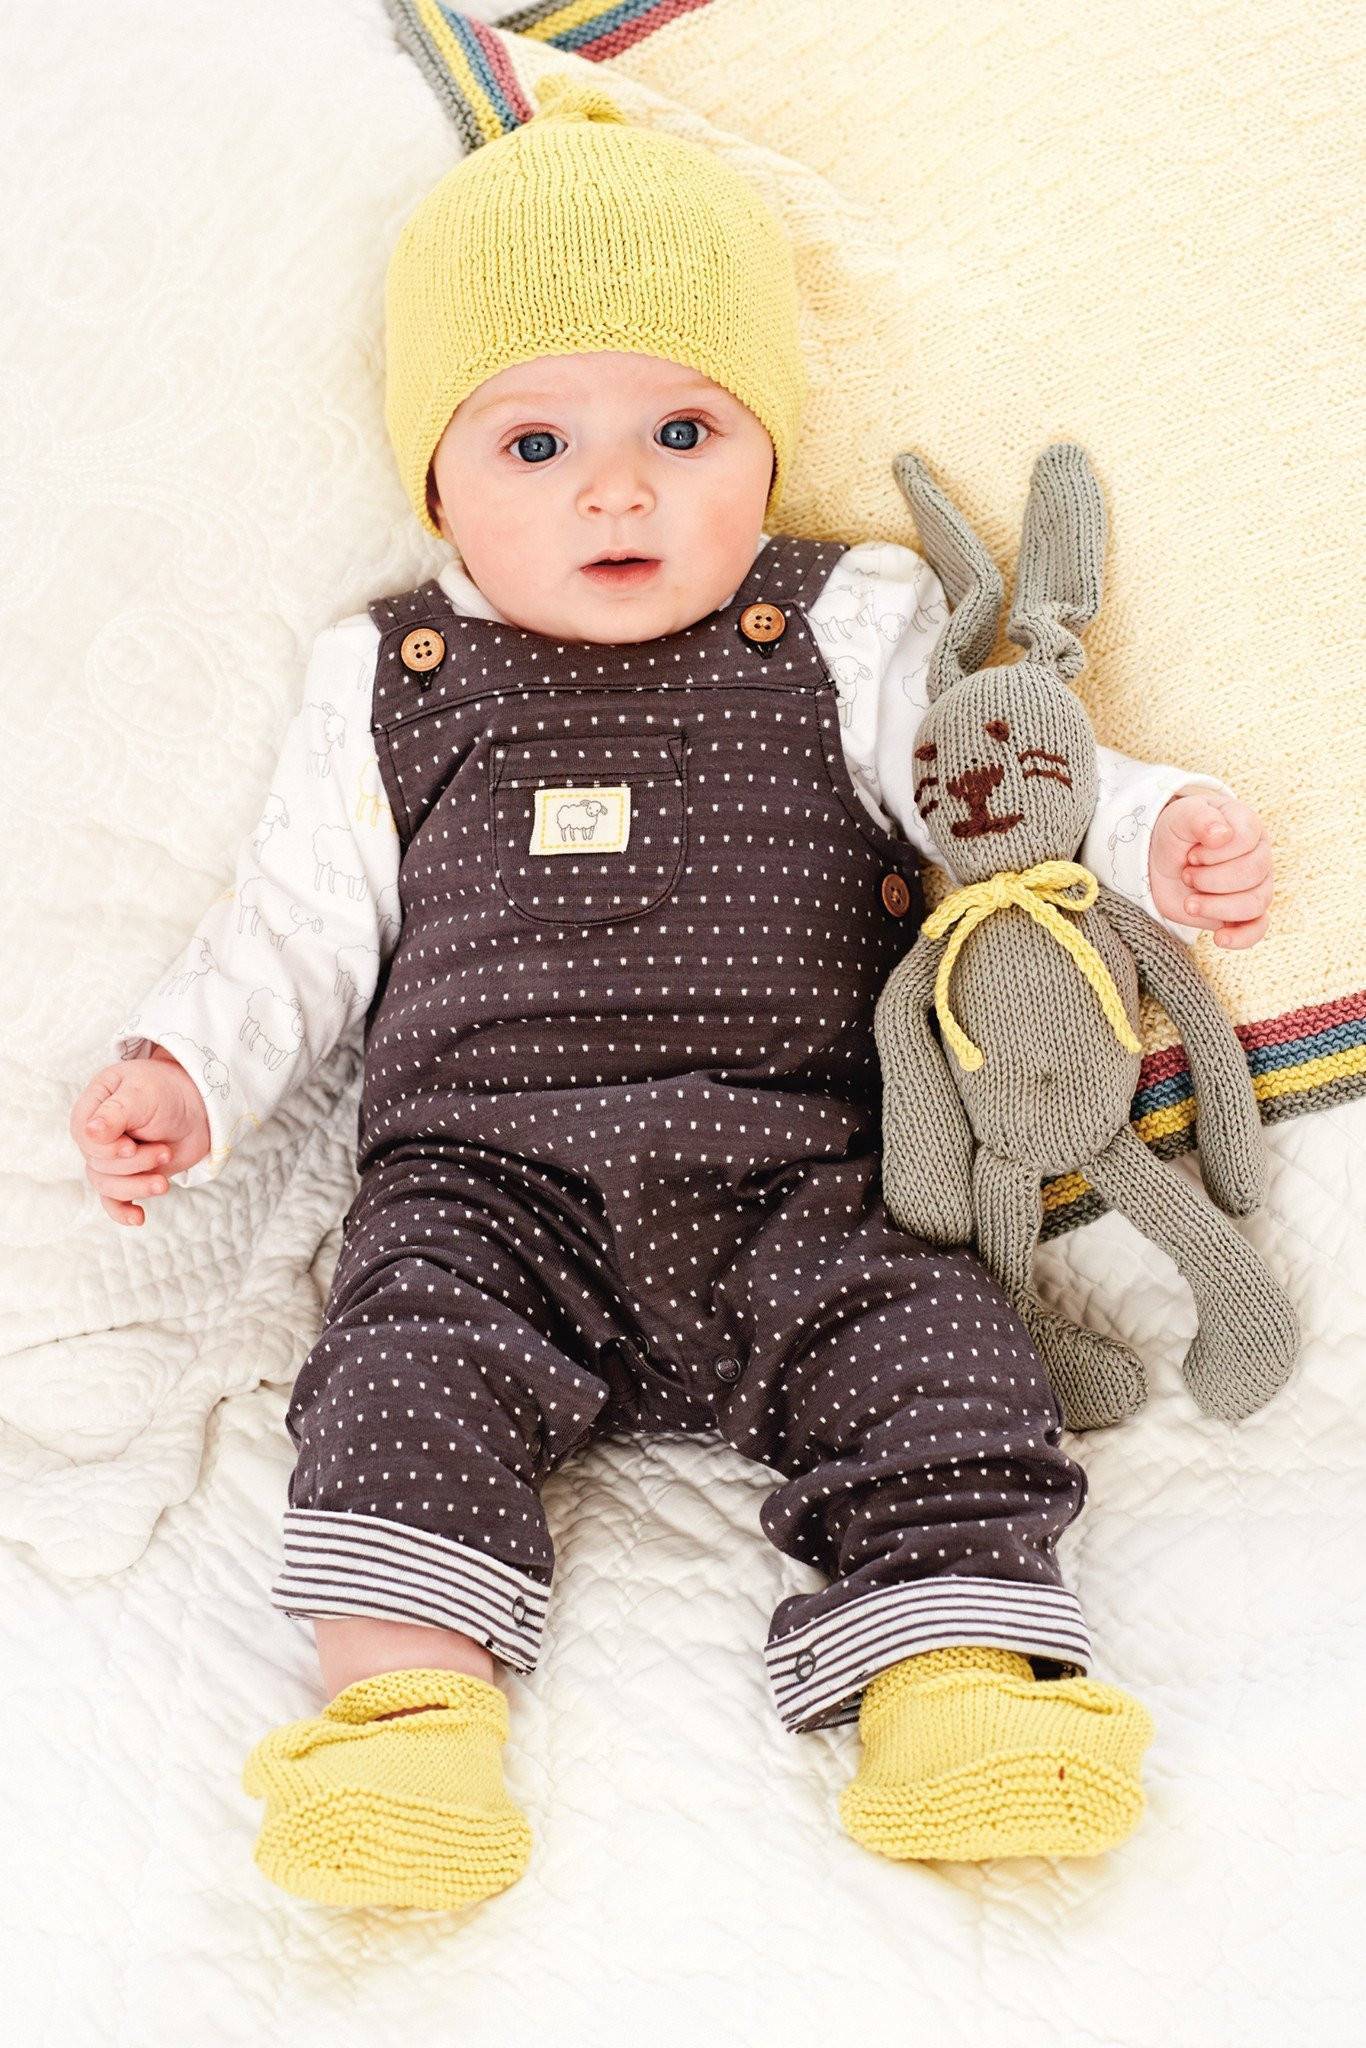 Baby Clothes, Toy And Blanket Set Knitting Patterns | The Knitting Network